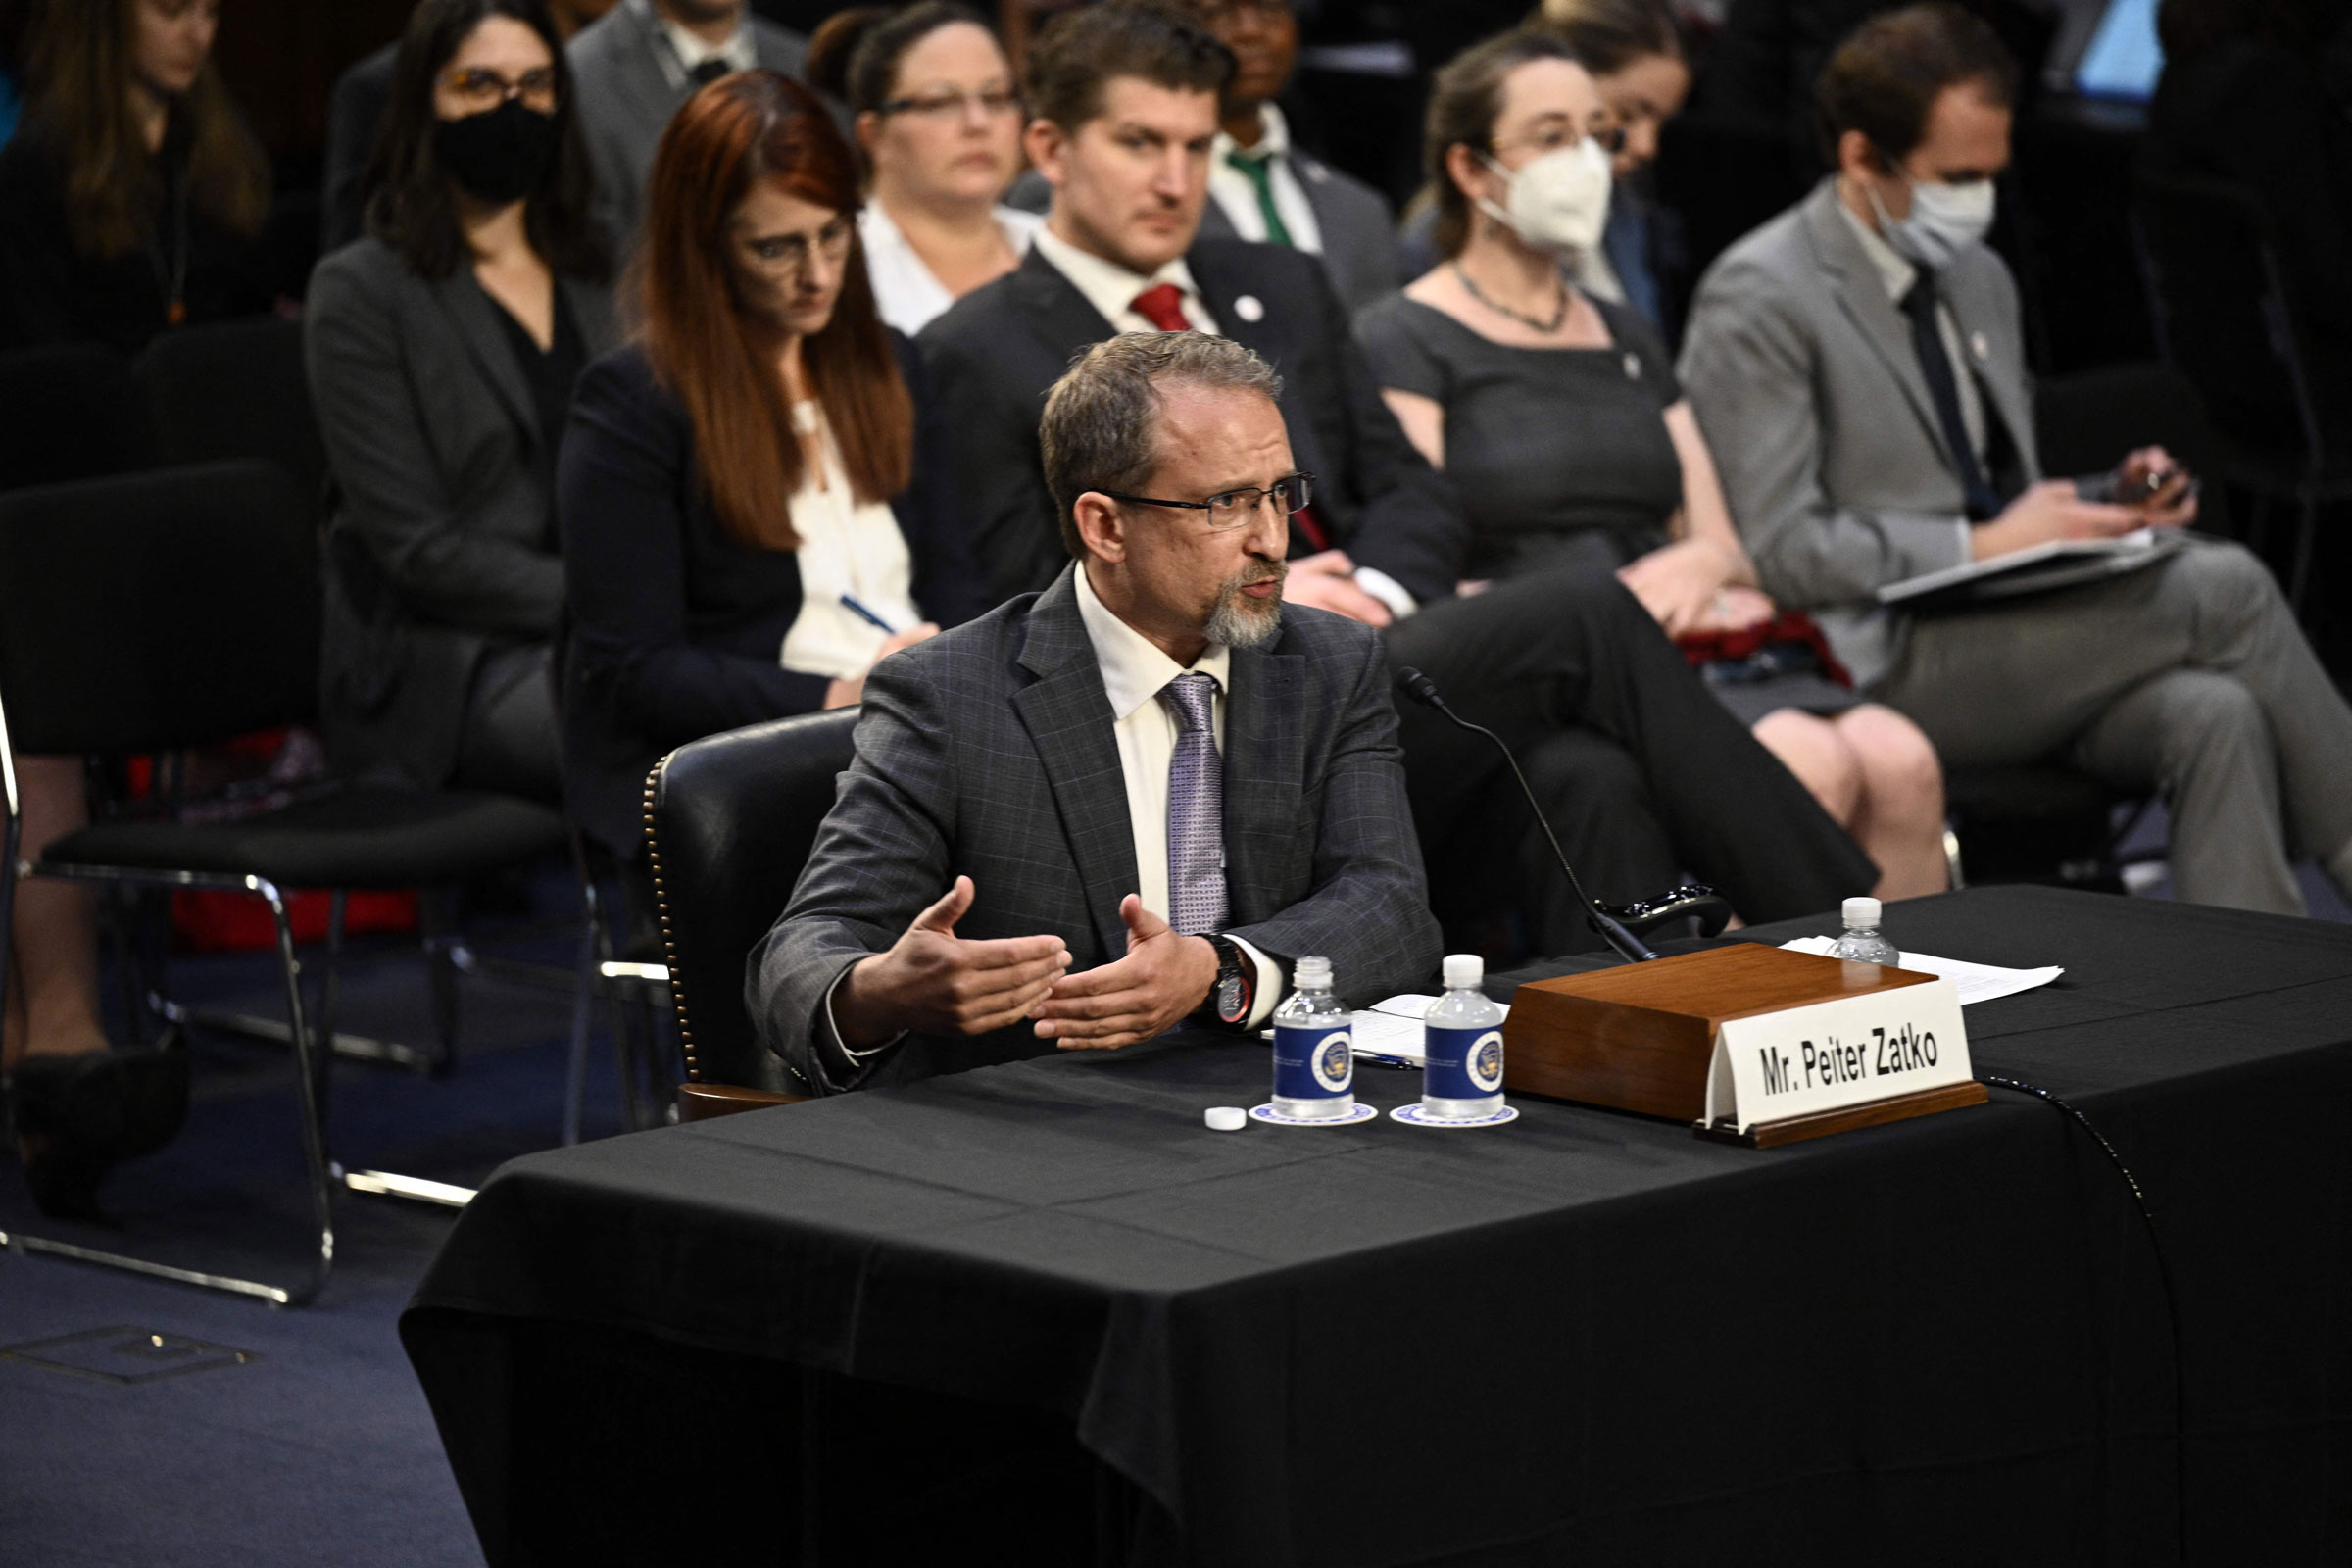 Independent Security Consultant and Twitter whistleblower Peiter "Mudge" Zatko testifies before the US Senate Judiciary Committee on Capitol Hill in Washington, D.C., on September 13, 2022. (Brendan Smialowski—AFP/Getty Images)